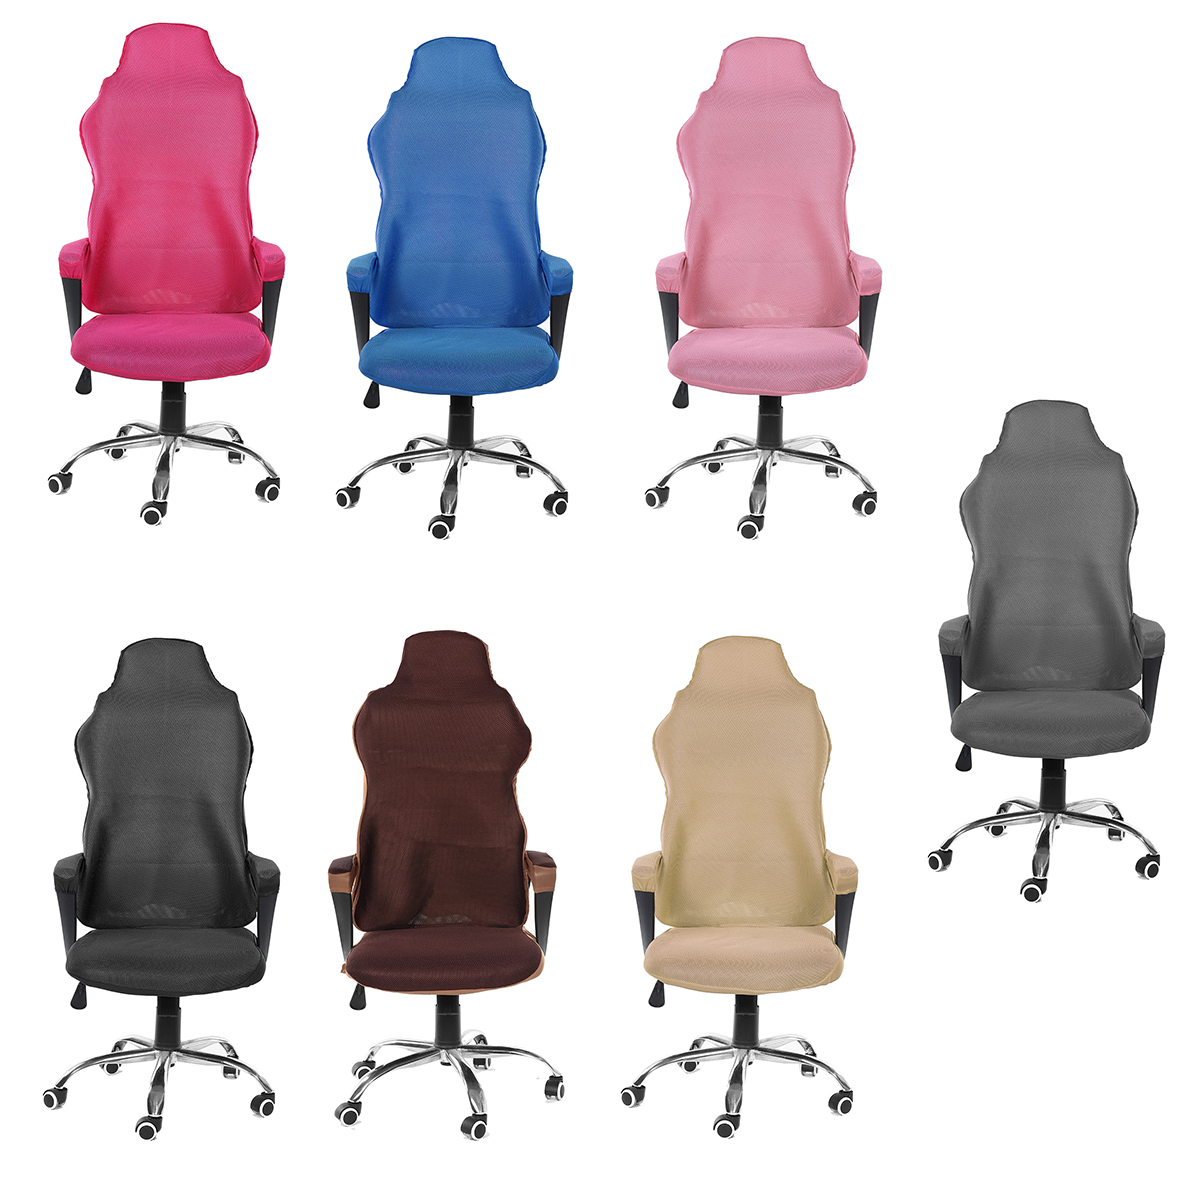 Mesh-Gaming-Chair-Elastic-Chair-Cover-Office-Chair-Dustproof-Chair-Cover-Home-Office-Solid-Color-Cha-1827333-2